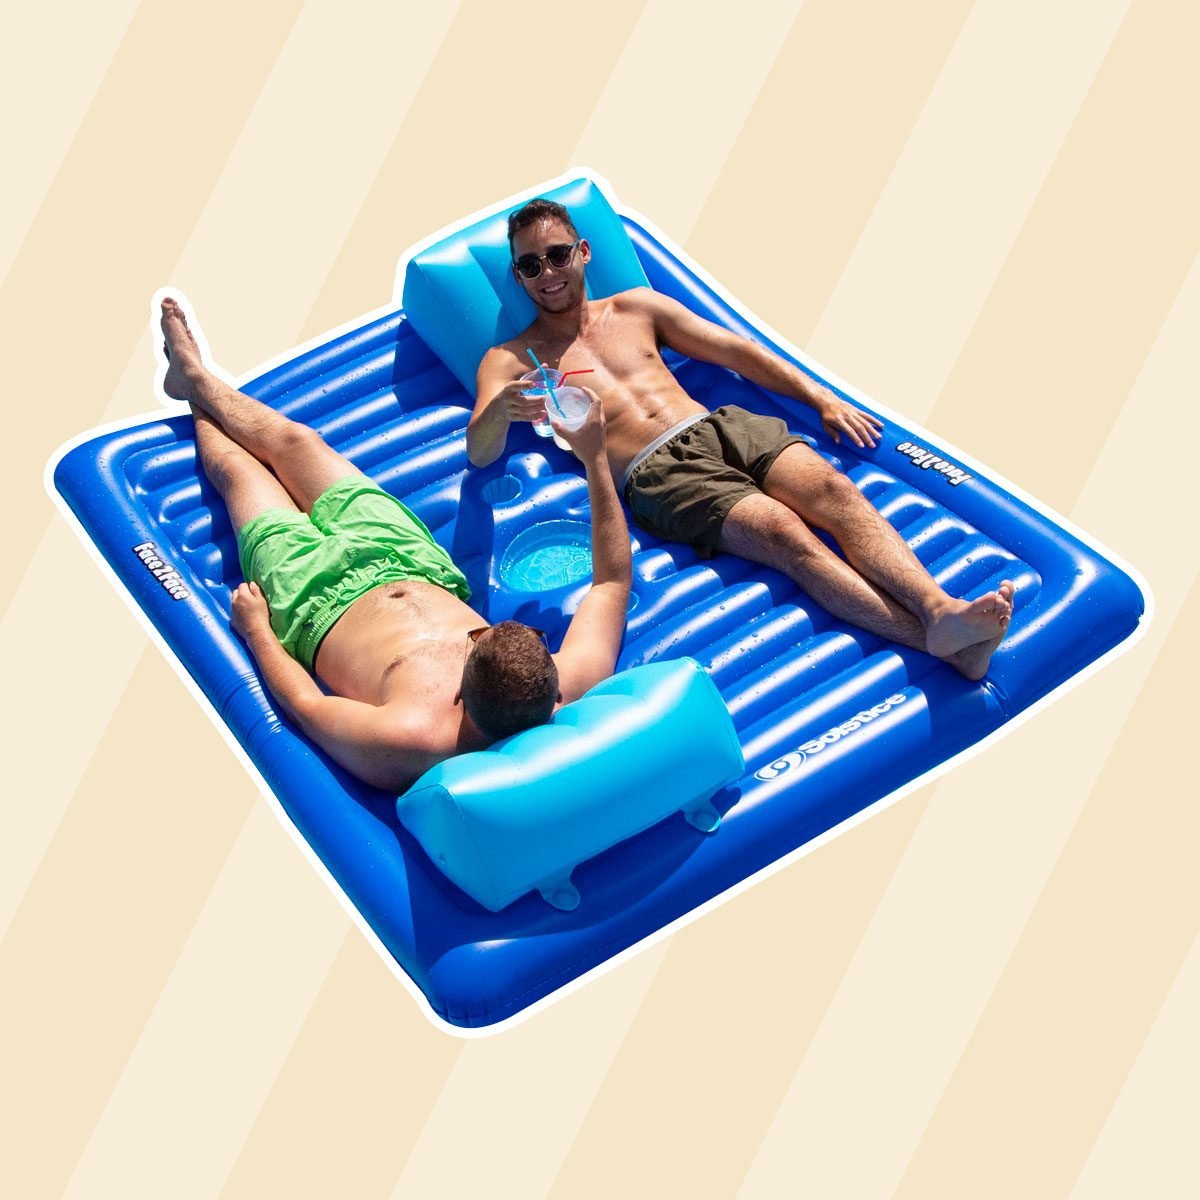 20 Best Pool Floats for Kids & Adults | Summer 2021